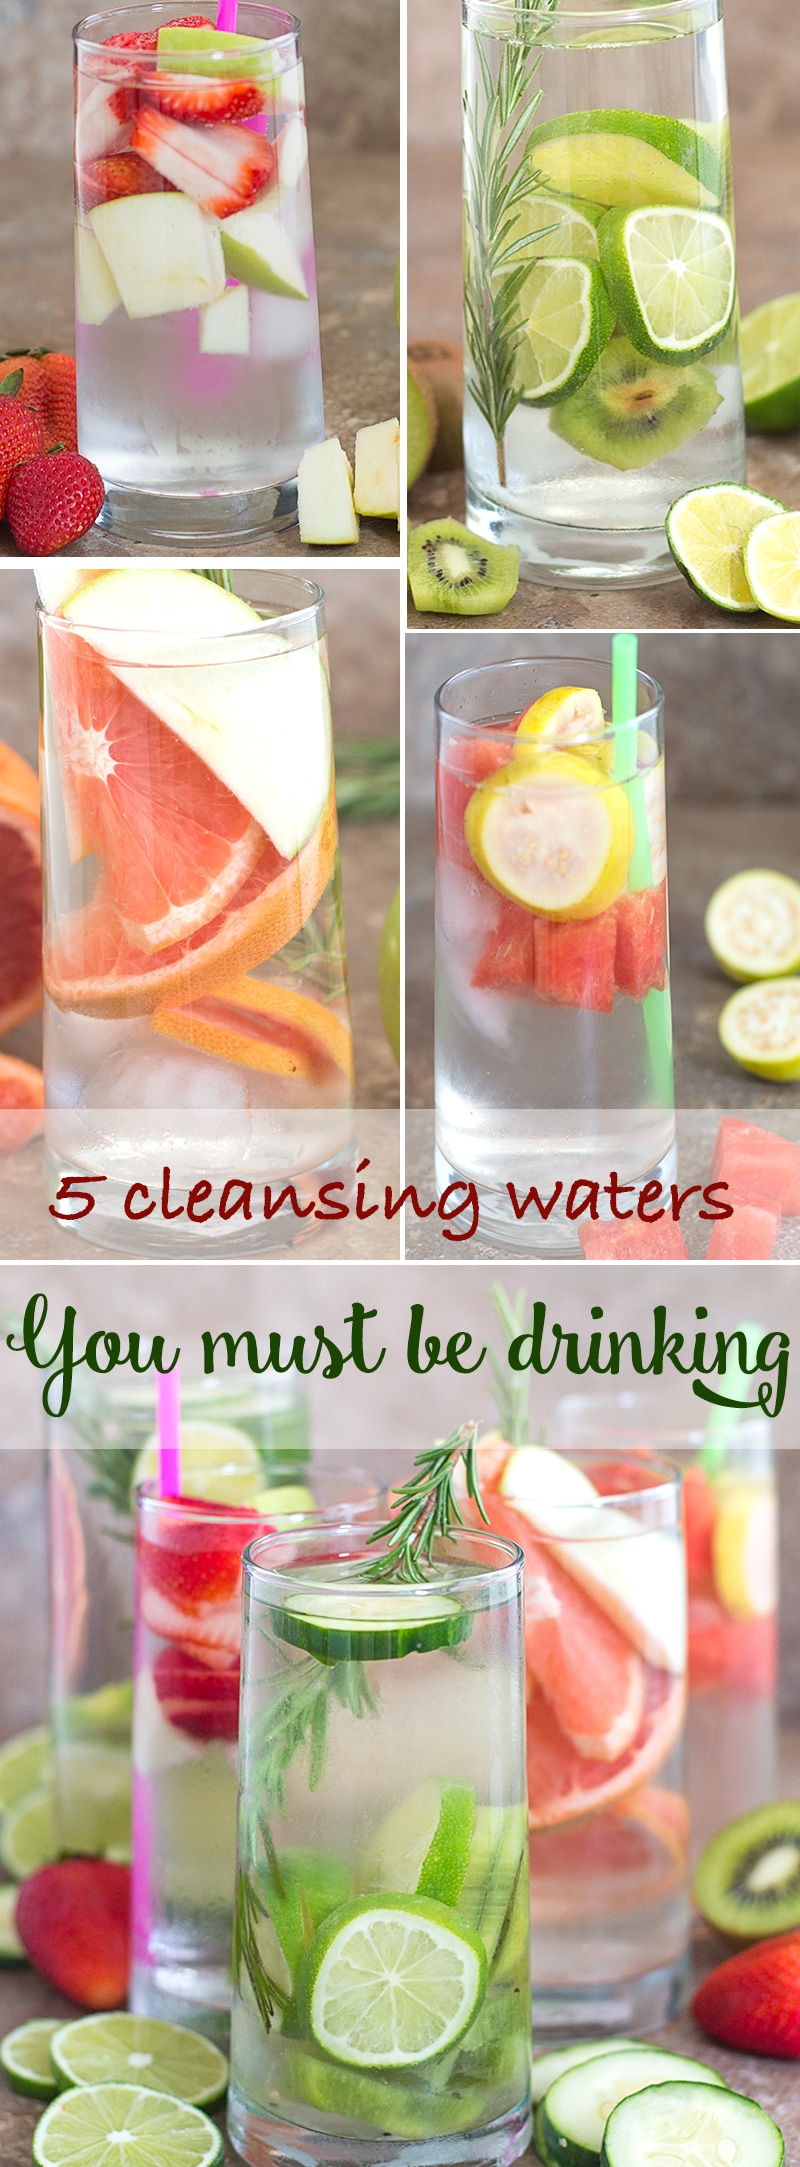 5 delicious summer cleansing waters that you should be drinking everyday to stay hydrated